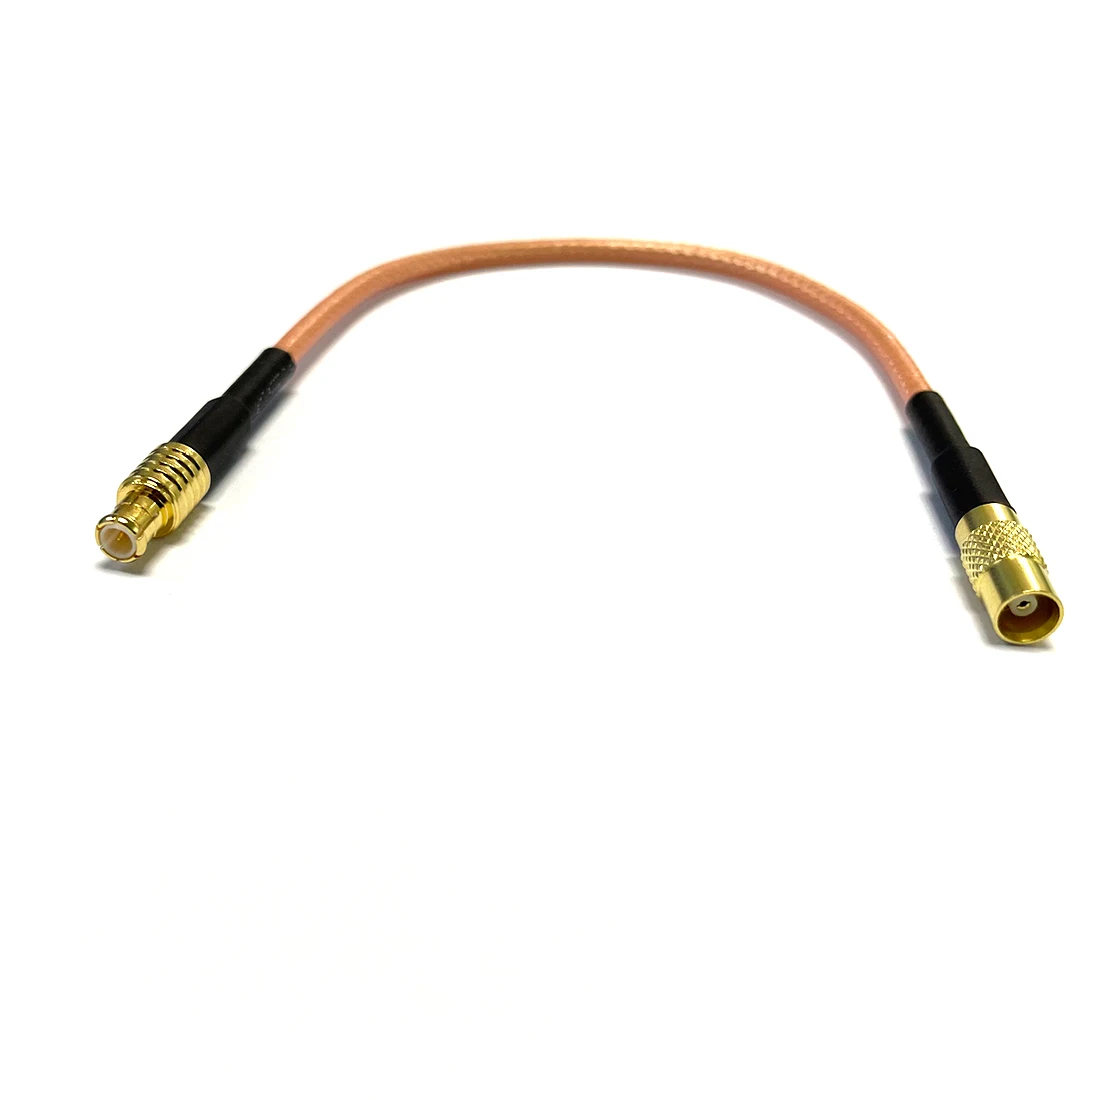 New MCX Plug Switch MCX Male Female Jack Straight Pigtail Cable Adapter RG316 Wholesale 15CM/30CM/50CM for WIFI Modem